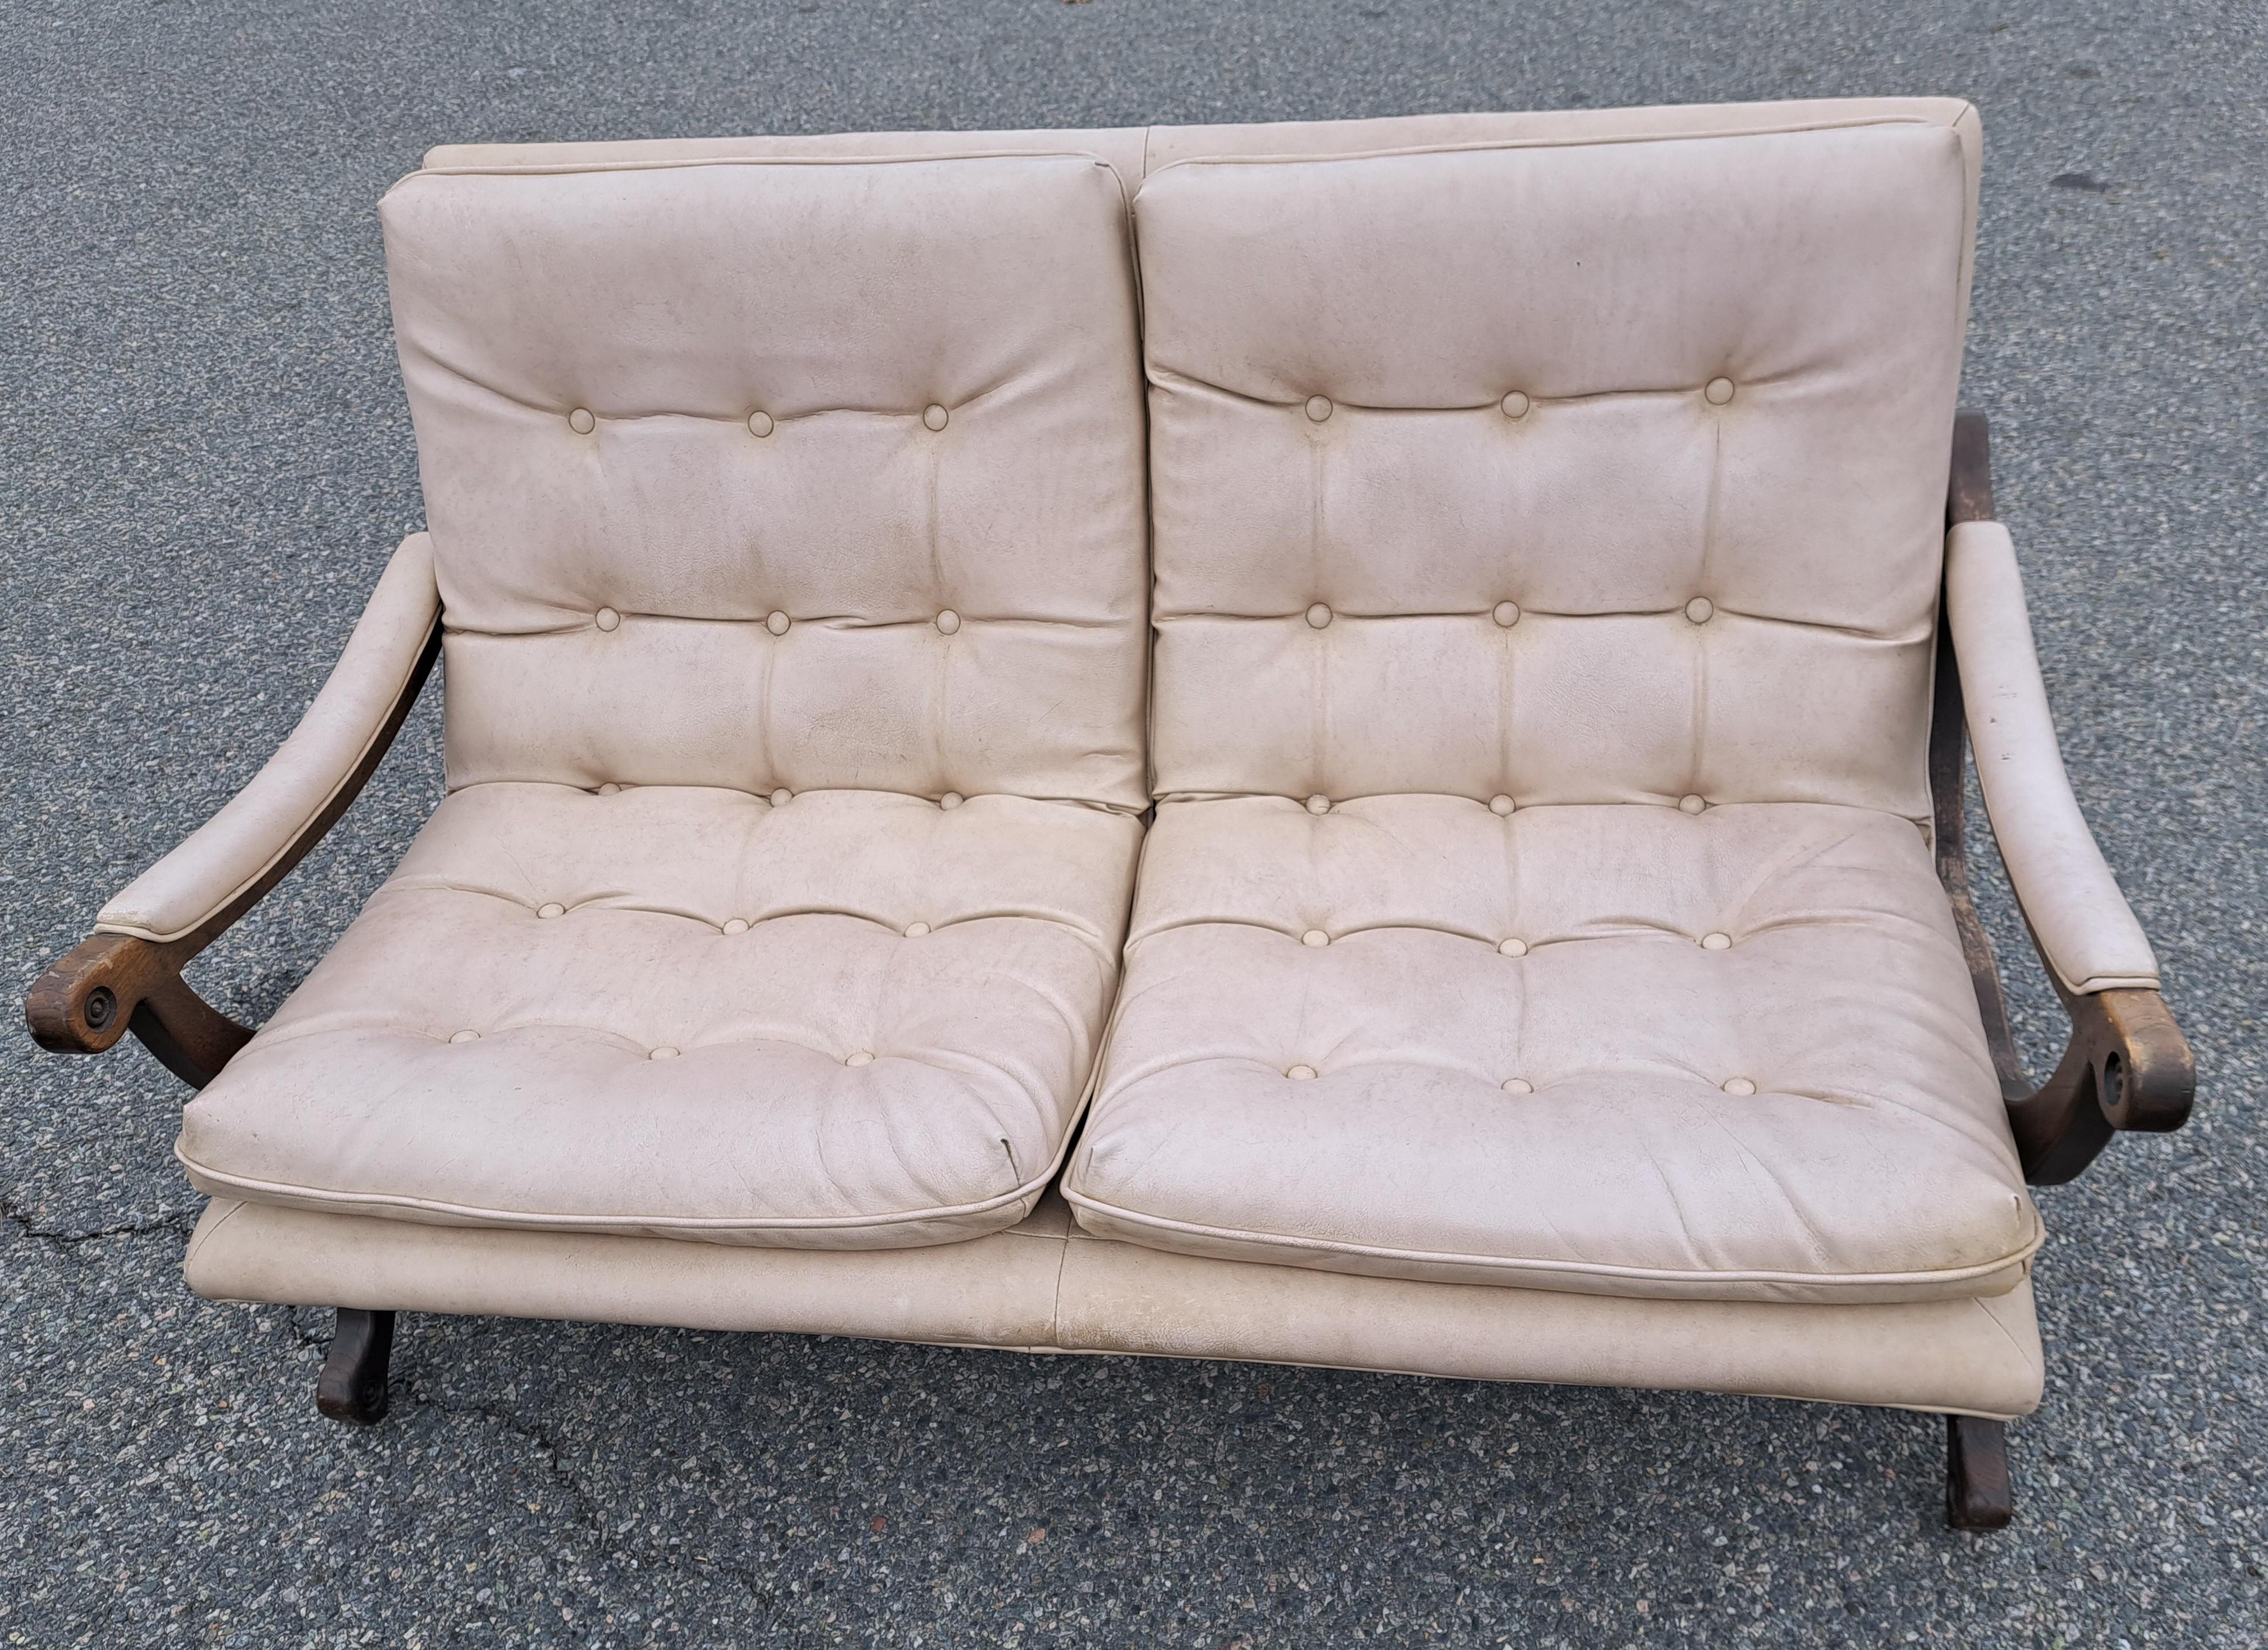 Mid-century, modern Hollywood regency curved foot Sati lo smade of wood with tufted leather seats.